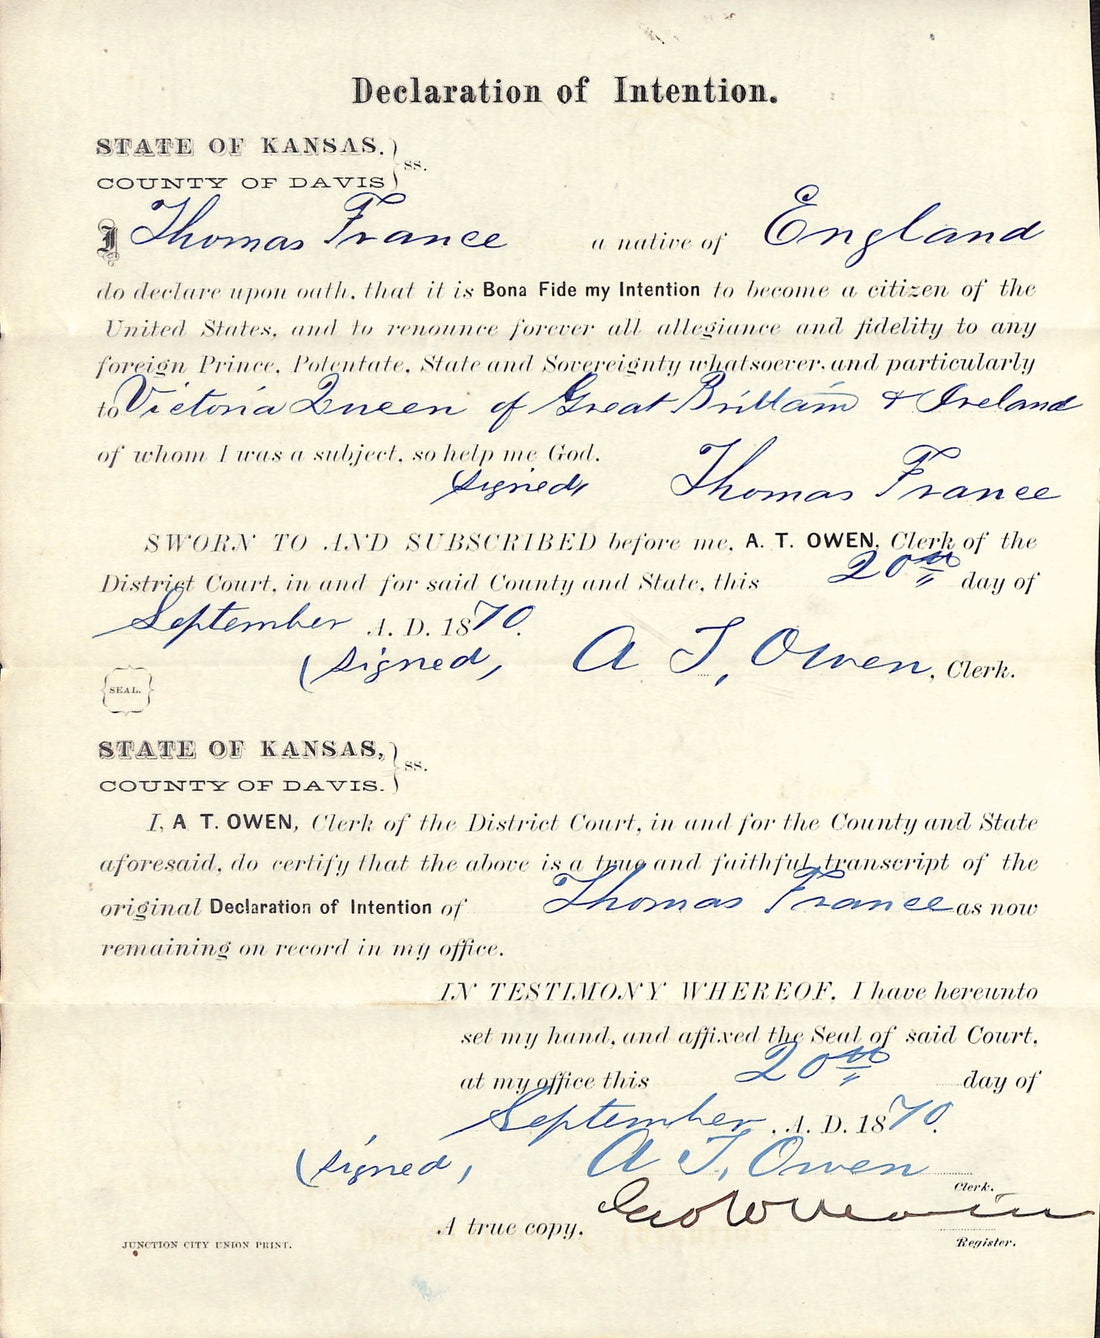 Naturalization papers in a Homestead packet